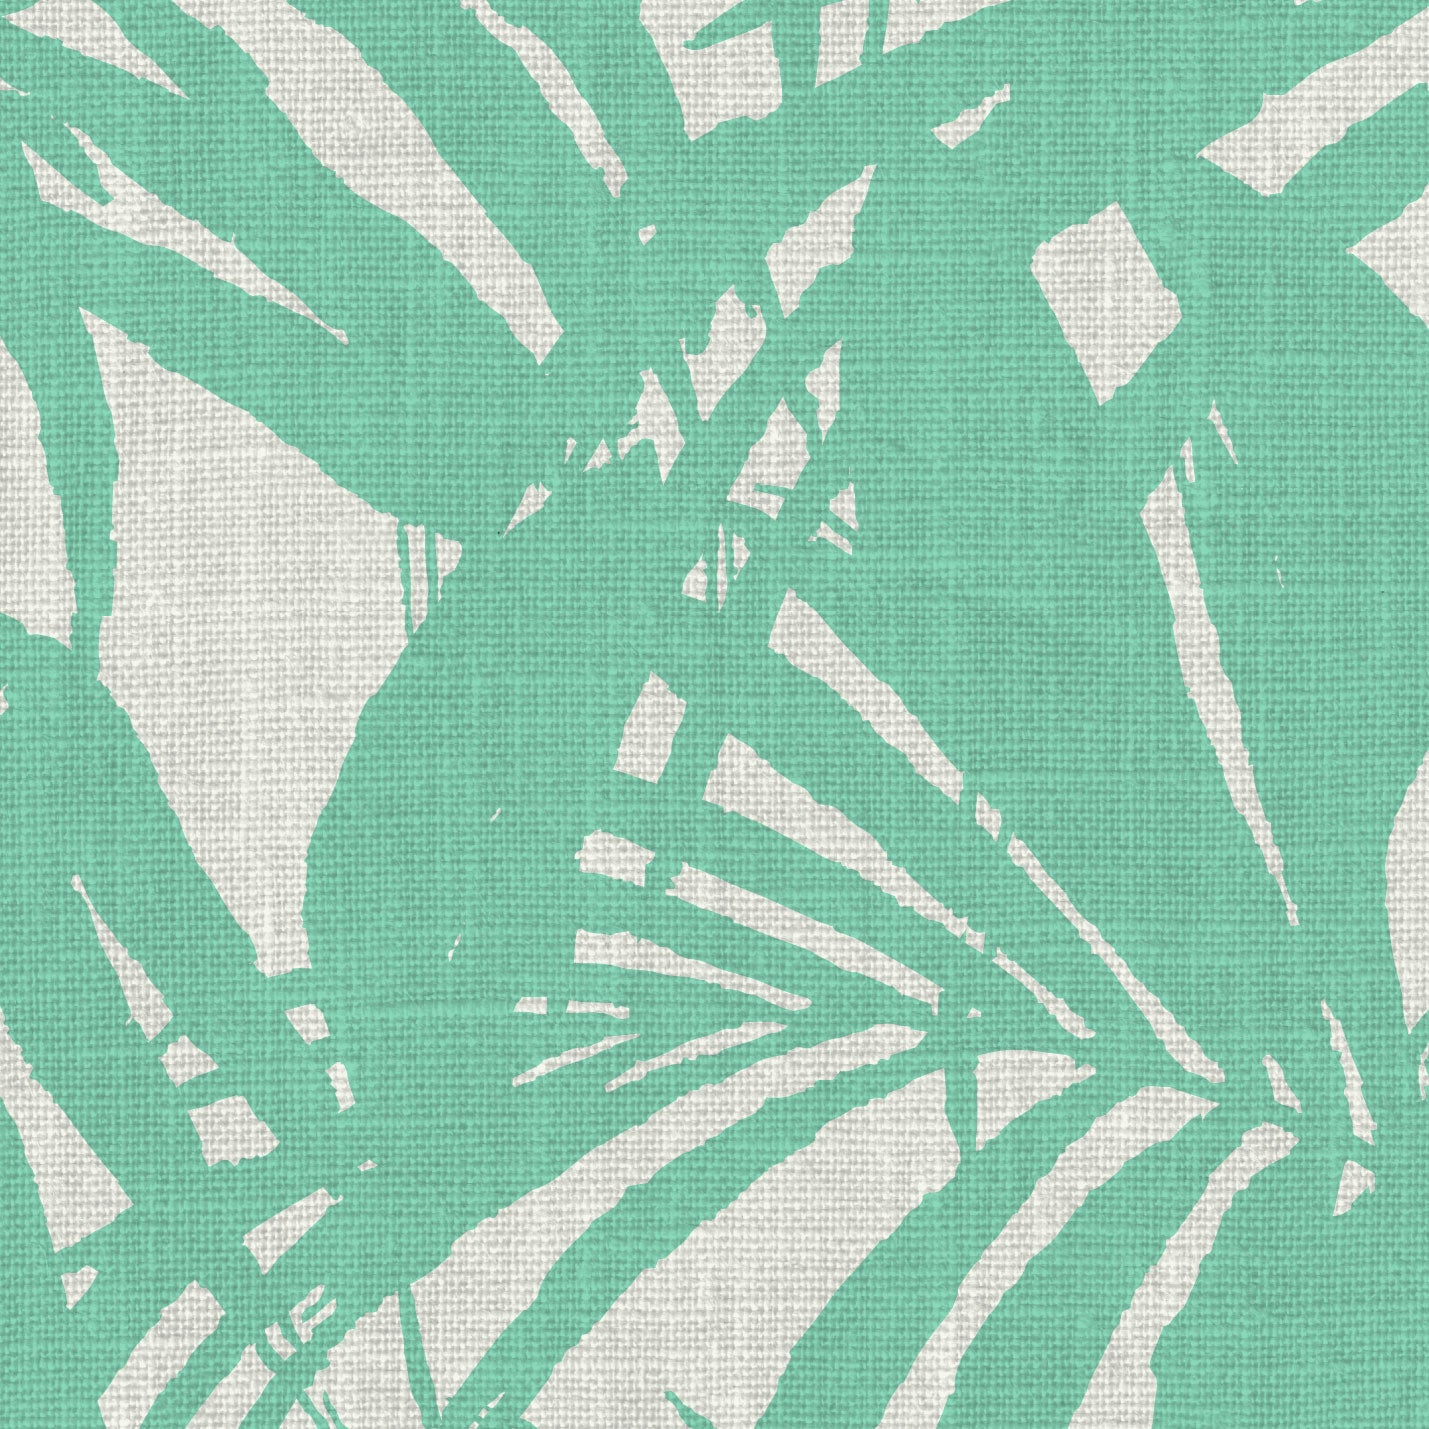 wallpaper oversize tropical leaf Natural Textured Eco-Friendly Non-toxic High-quality Sustainable practices Sustainability Interior Design Wall covering Bold retro chic custom jungle garden botanical Seaside Coastal Seashore Waterfront Vacation home styling Retreat Relaxed beach vibes Beach cottage Shoreline Oceanfront white teal green mint linen